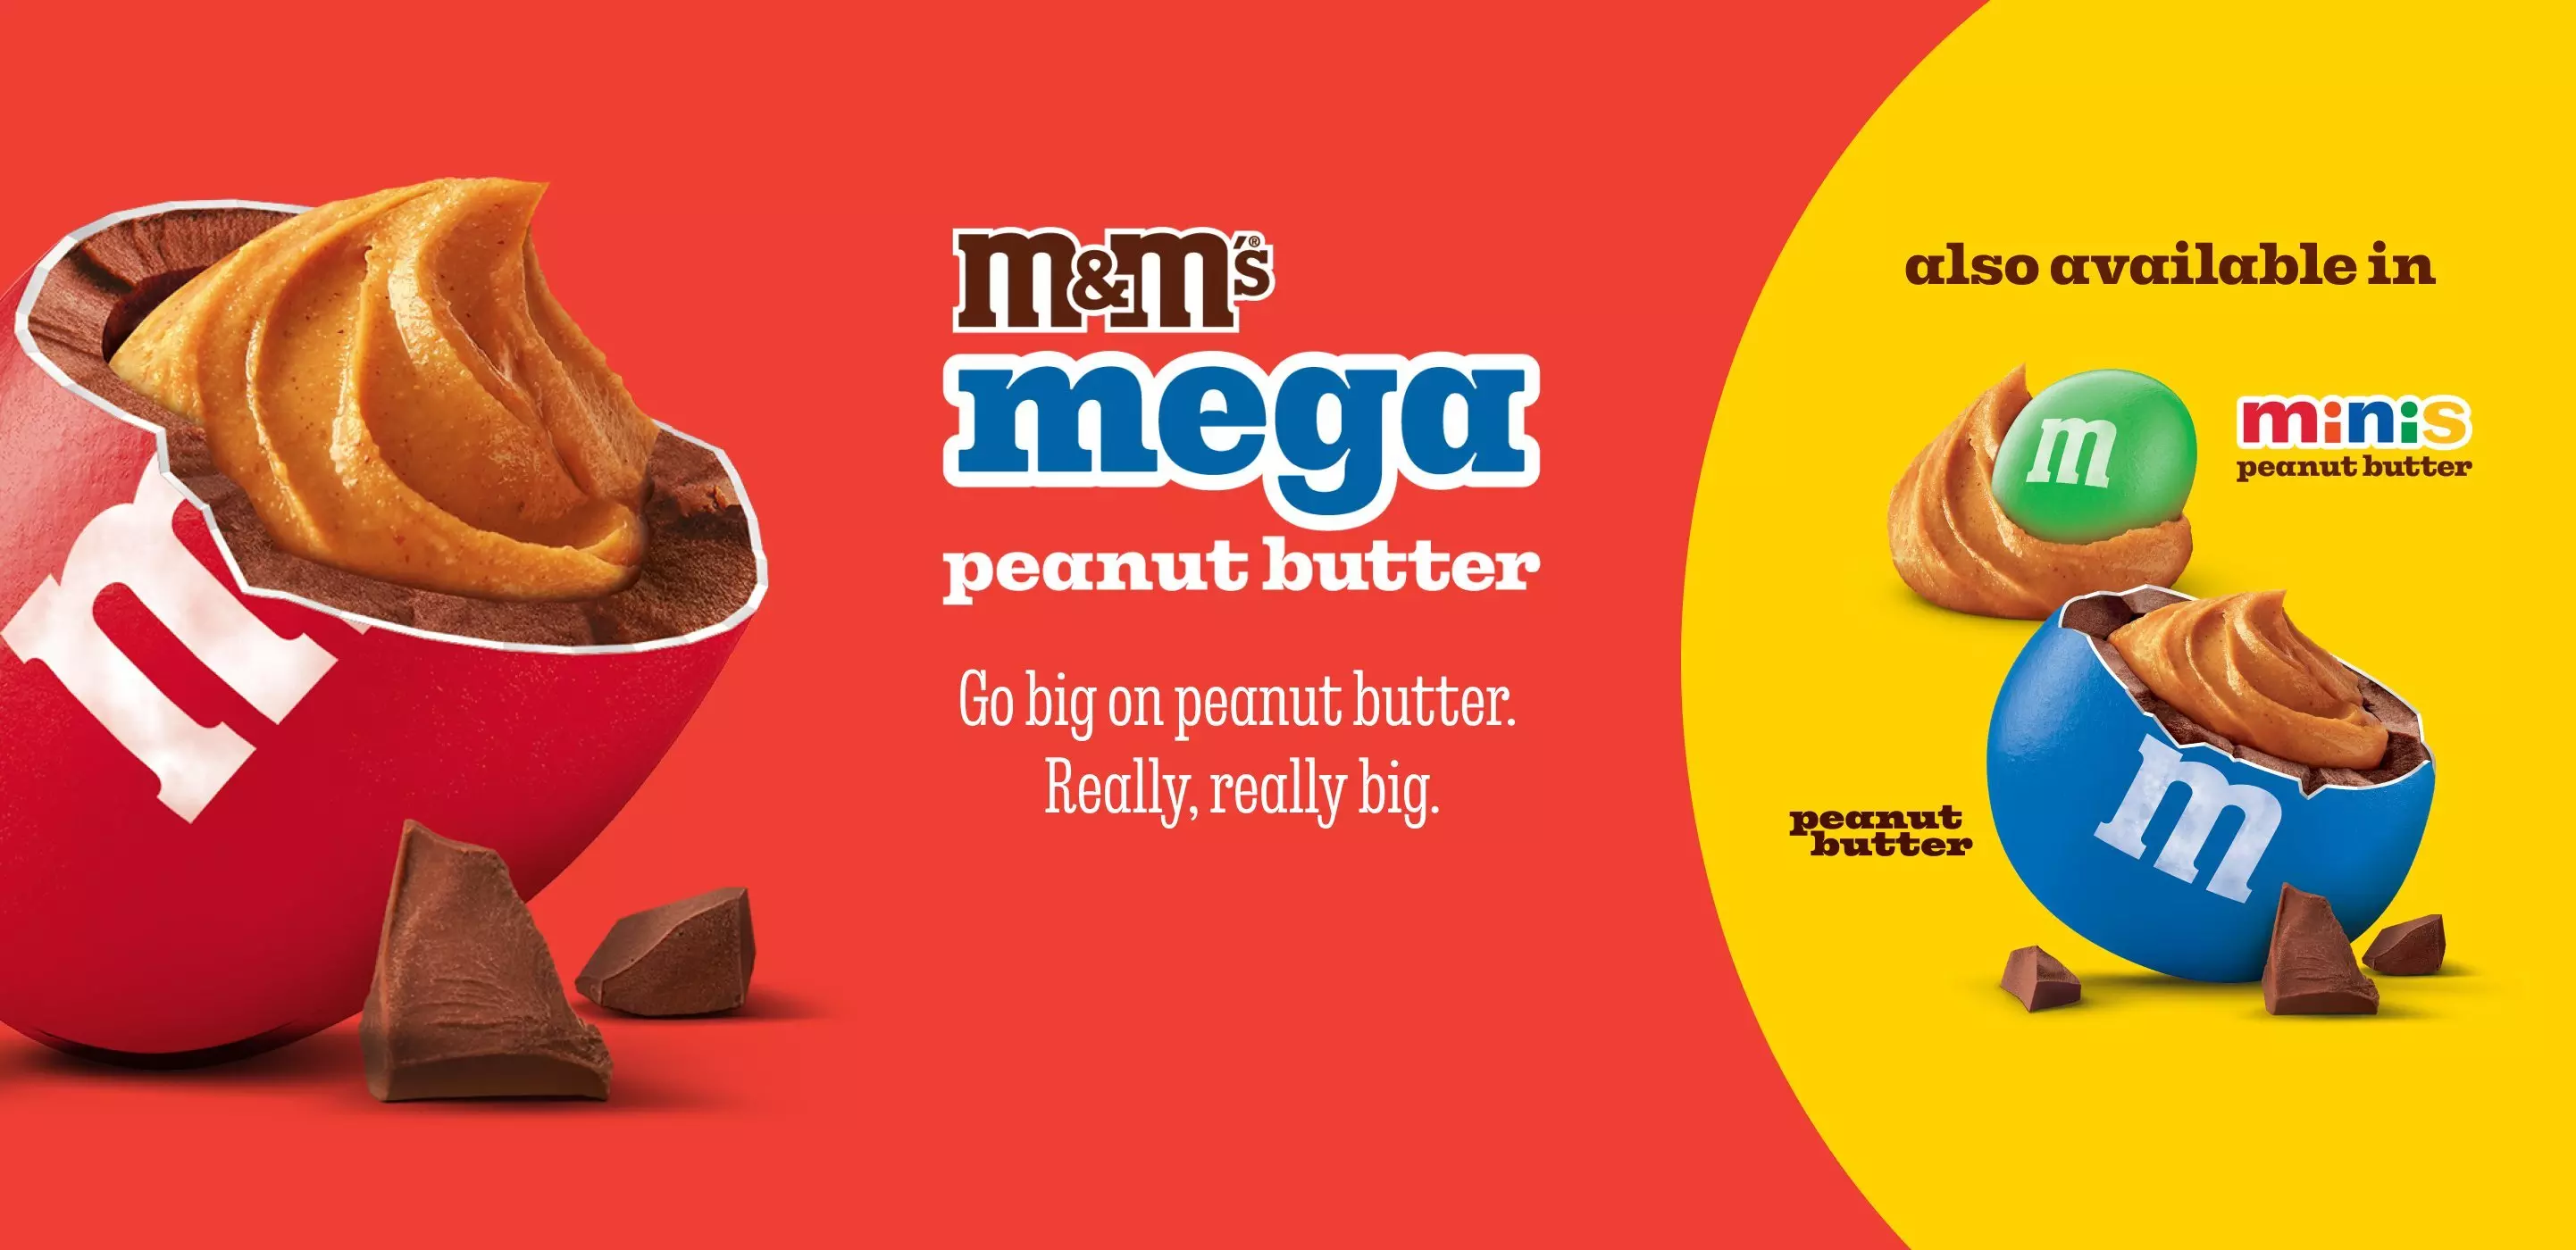 Try our 3 different peanut butter M&M'S varieties